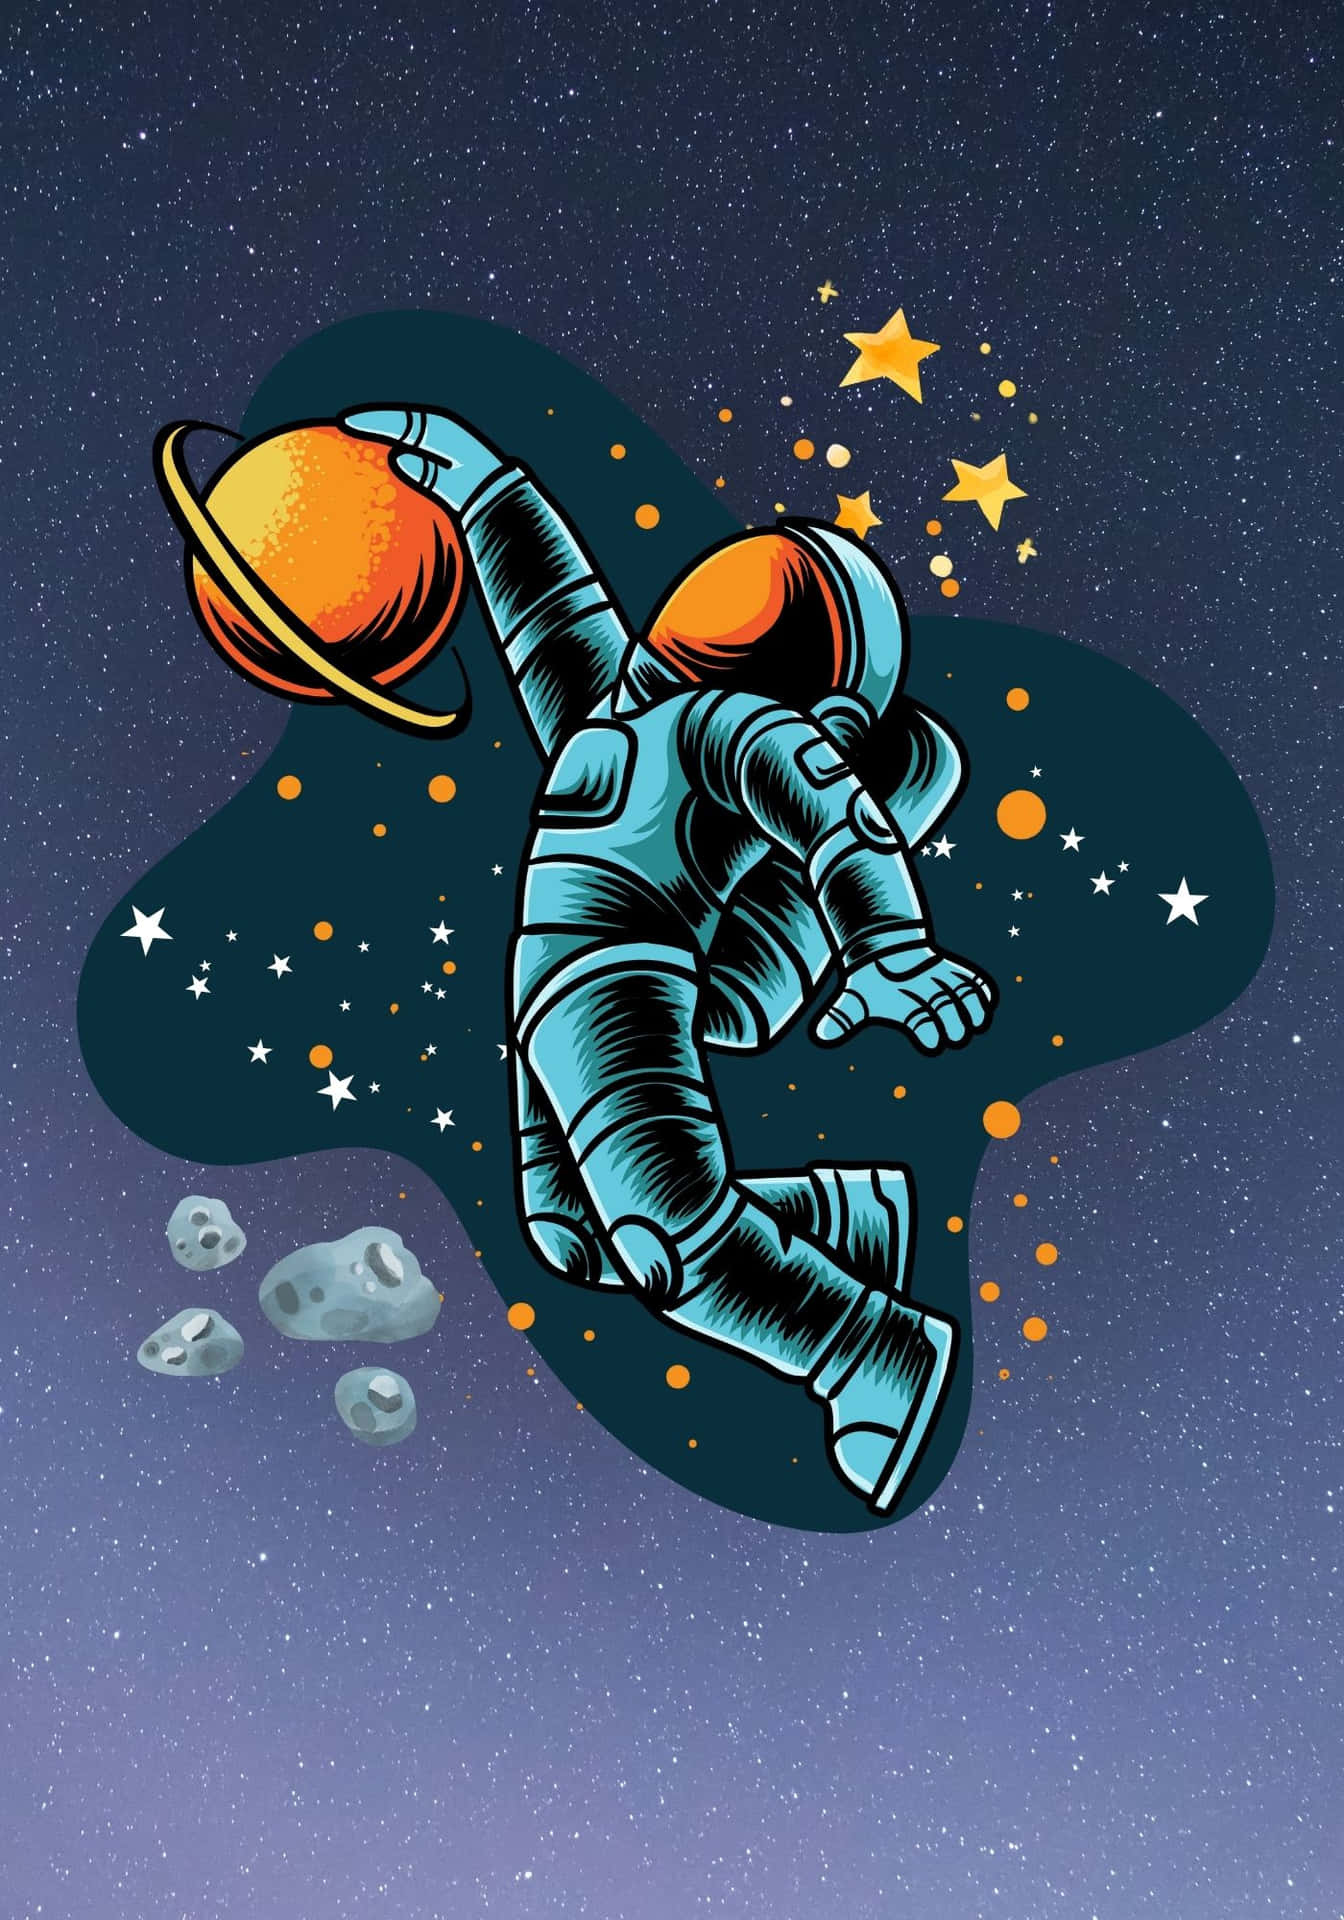 Download Cool Astronaut With Stars And Asteroid Background | Wallpapers.com